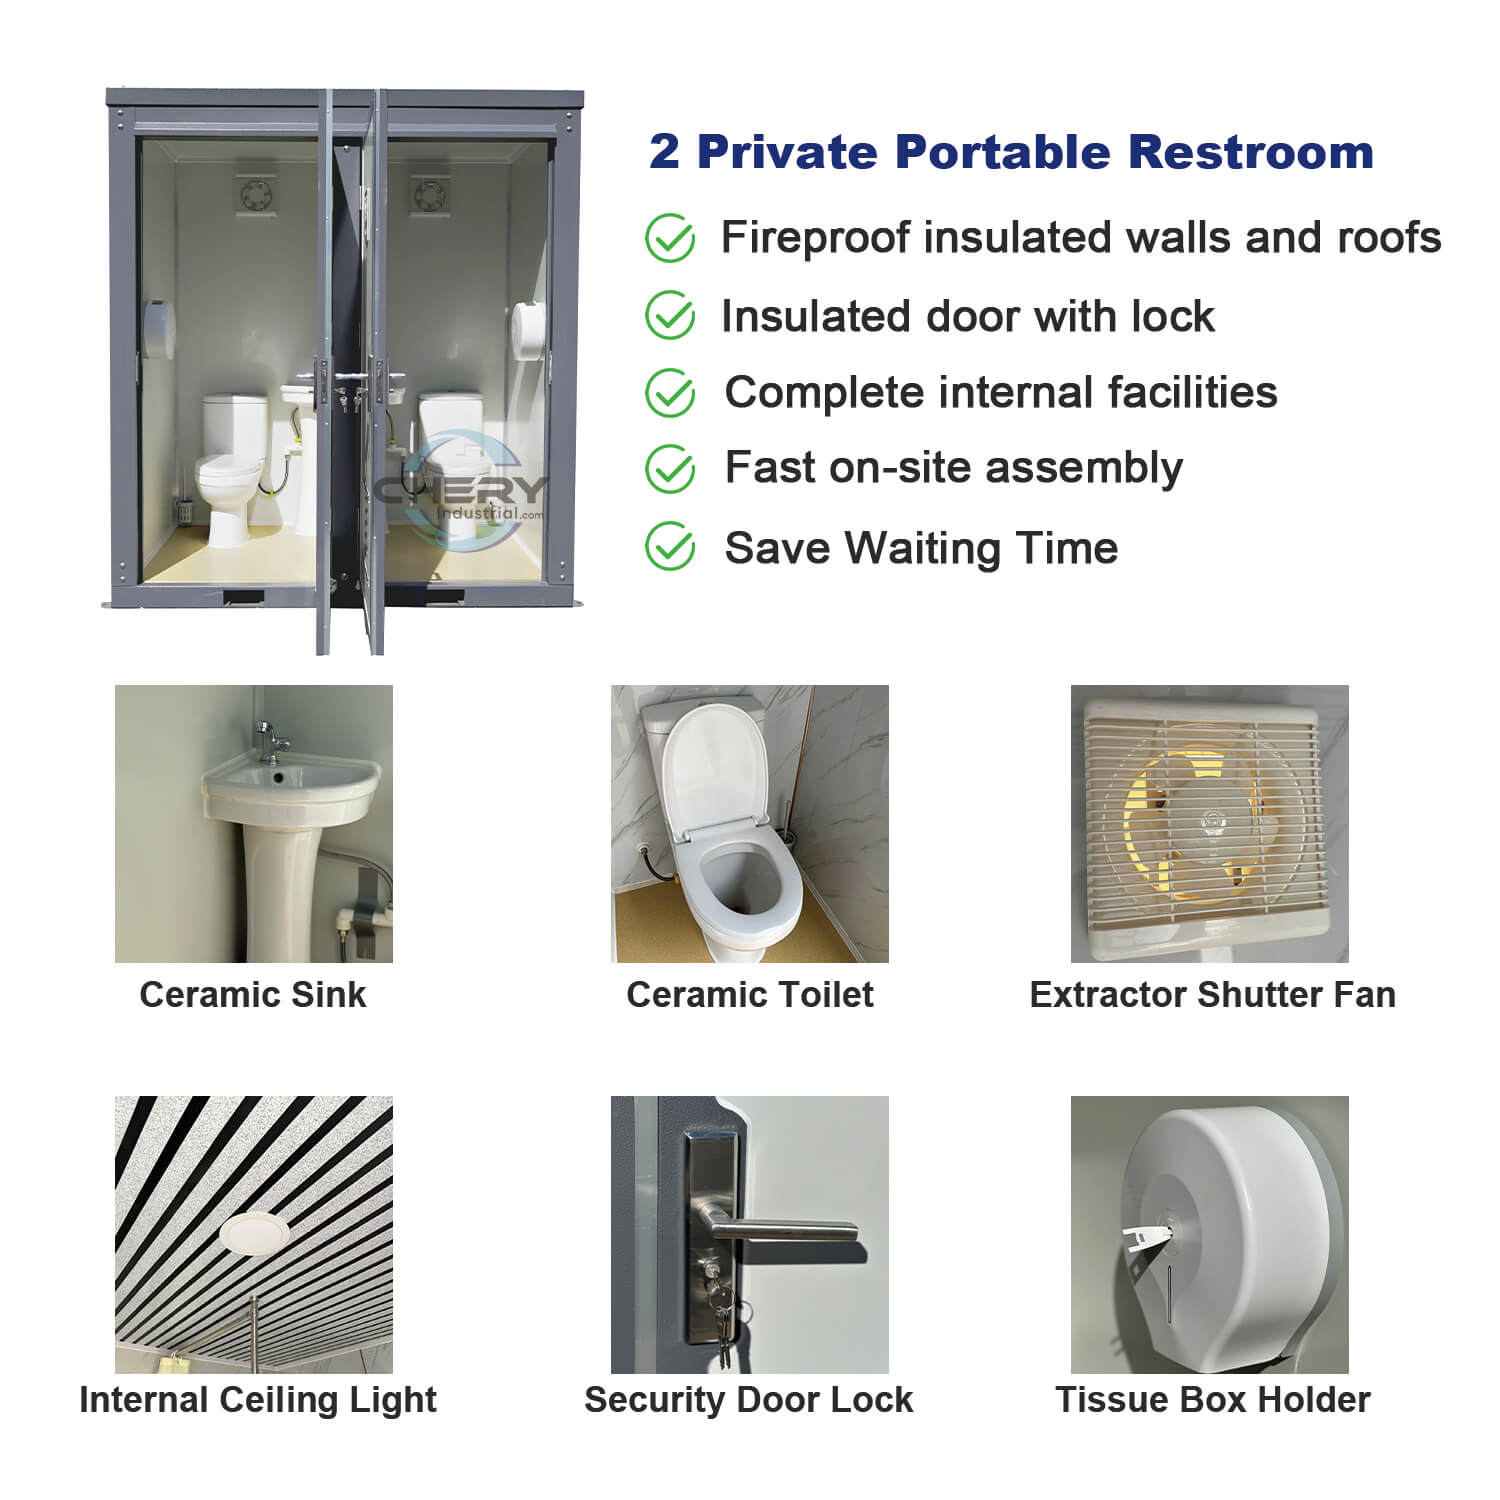 [AS-IS] 2 Private Toilet Stalls Portable Restroom